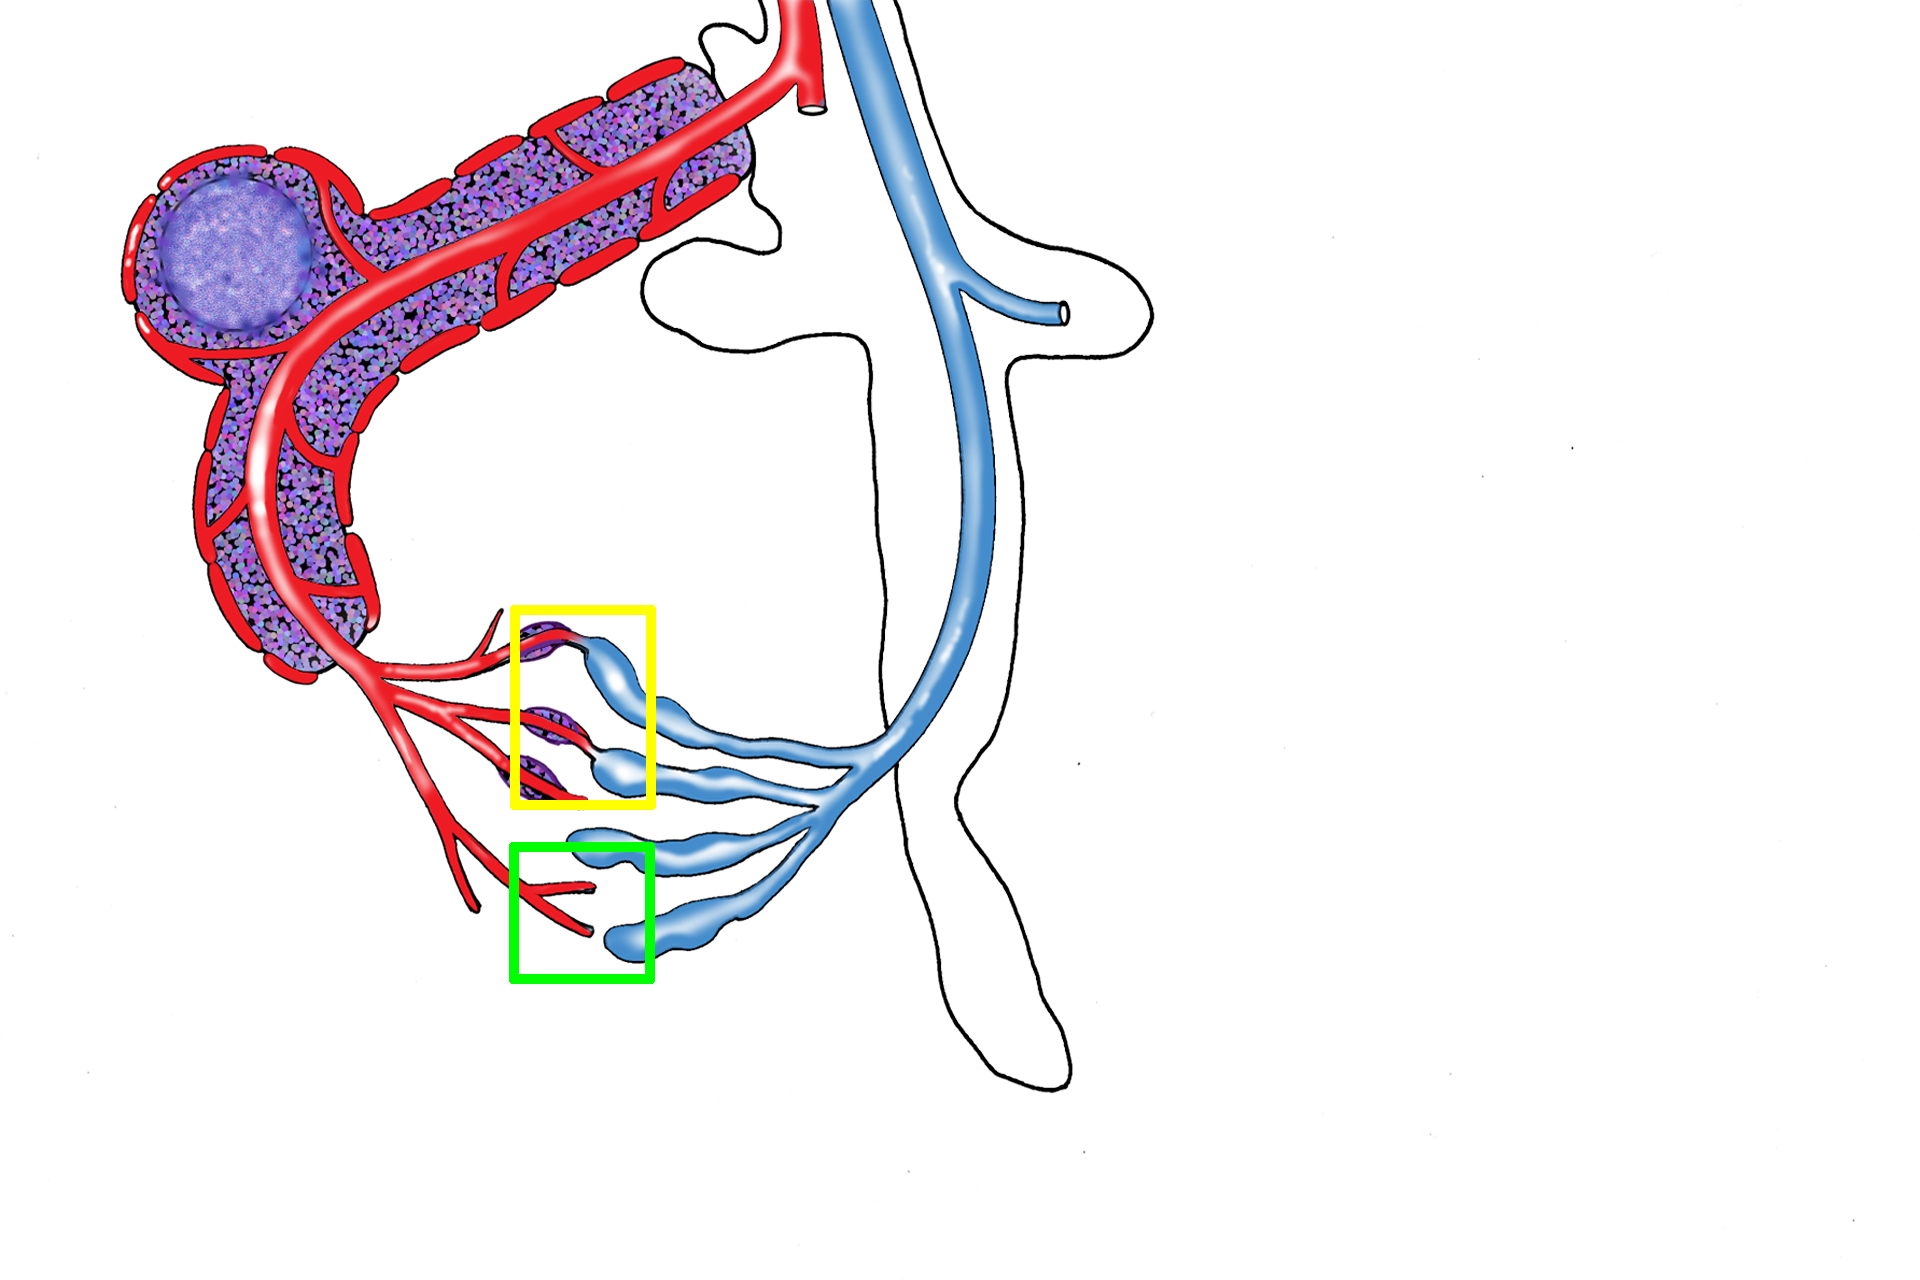 Open/closed circulations > <p>Sheathed and unsheathed capillaries either connect directly with the splenic sinuses (closed circulation, yellow rectangle) or open directly into the reticular connective tissue of the splenic cord, allowing blood to be exposed to cells of the splenic cord (open circulation, green square).  This open pathway allows blood to percolate indirectly into the splenic sinuses and is thought to predominate in humans.</p>
